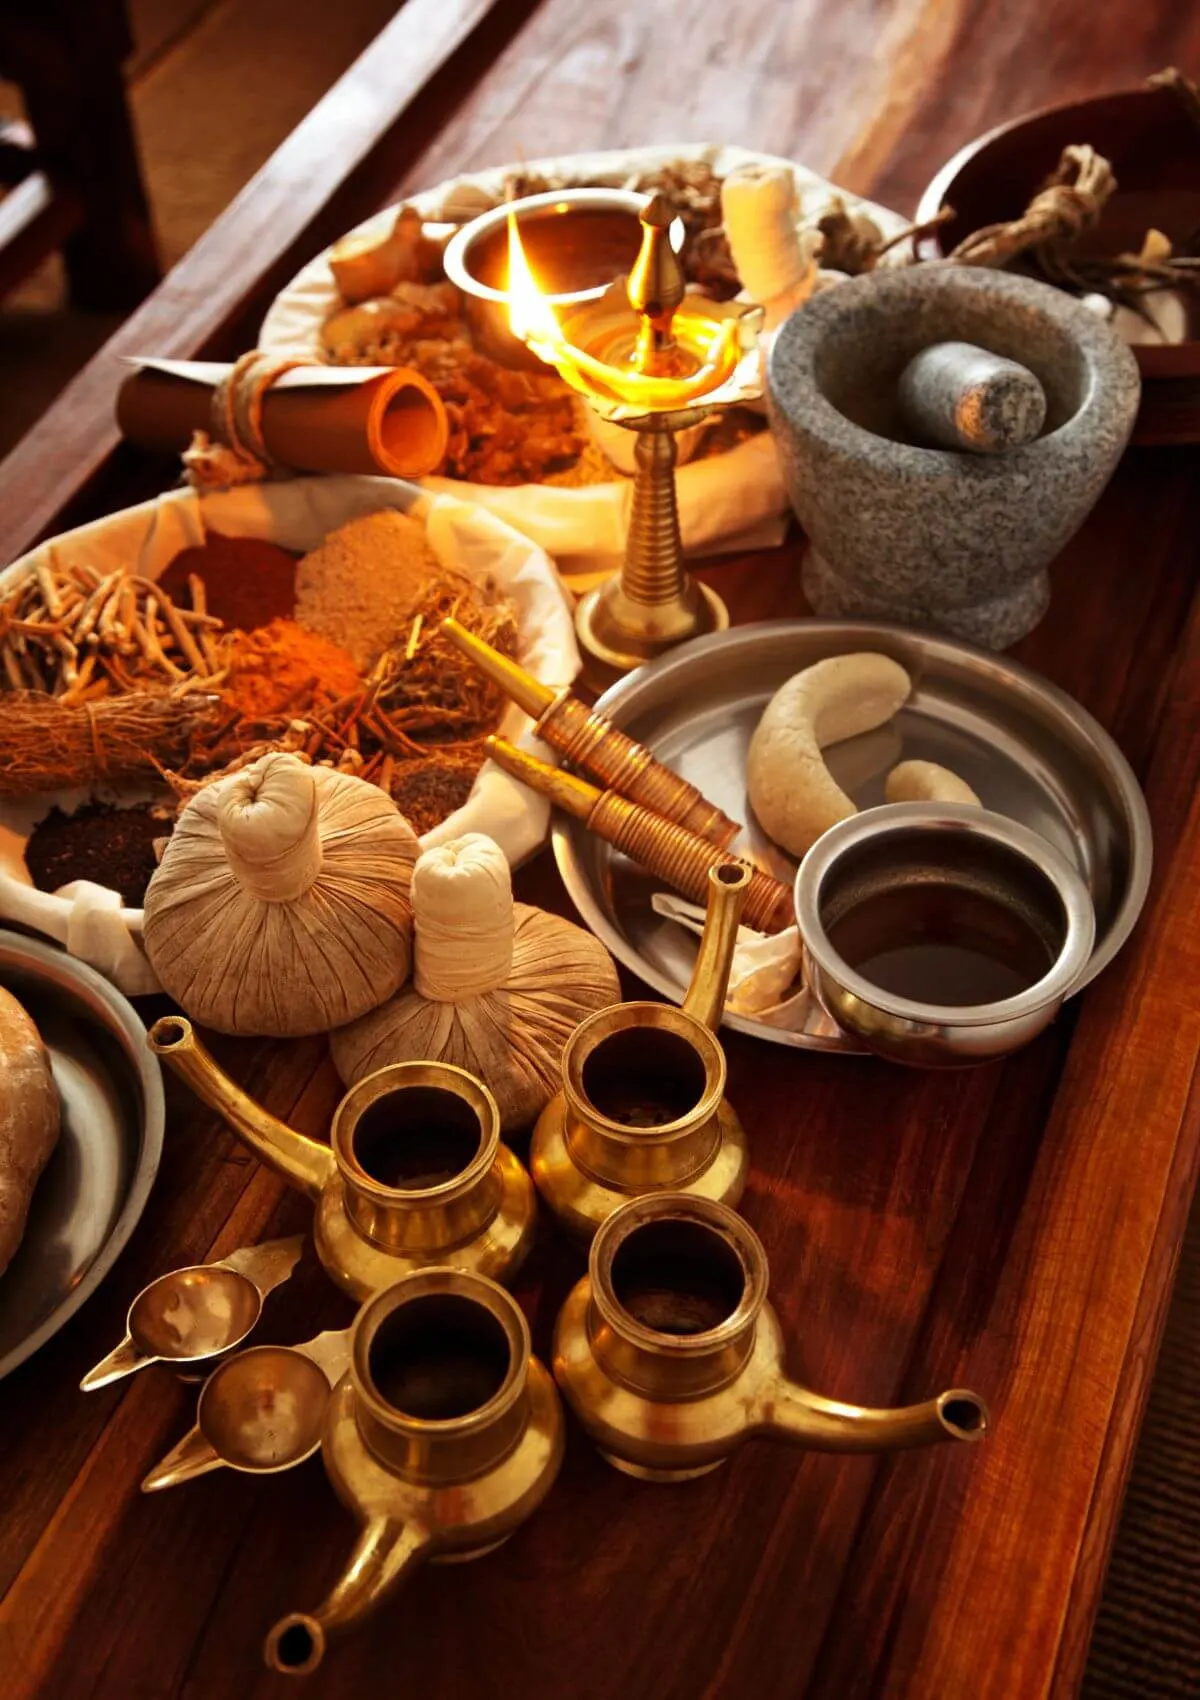 Ayurveda products make excellent souvenirs from India